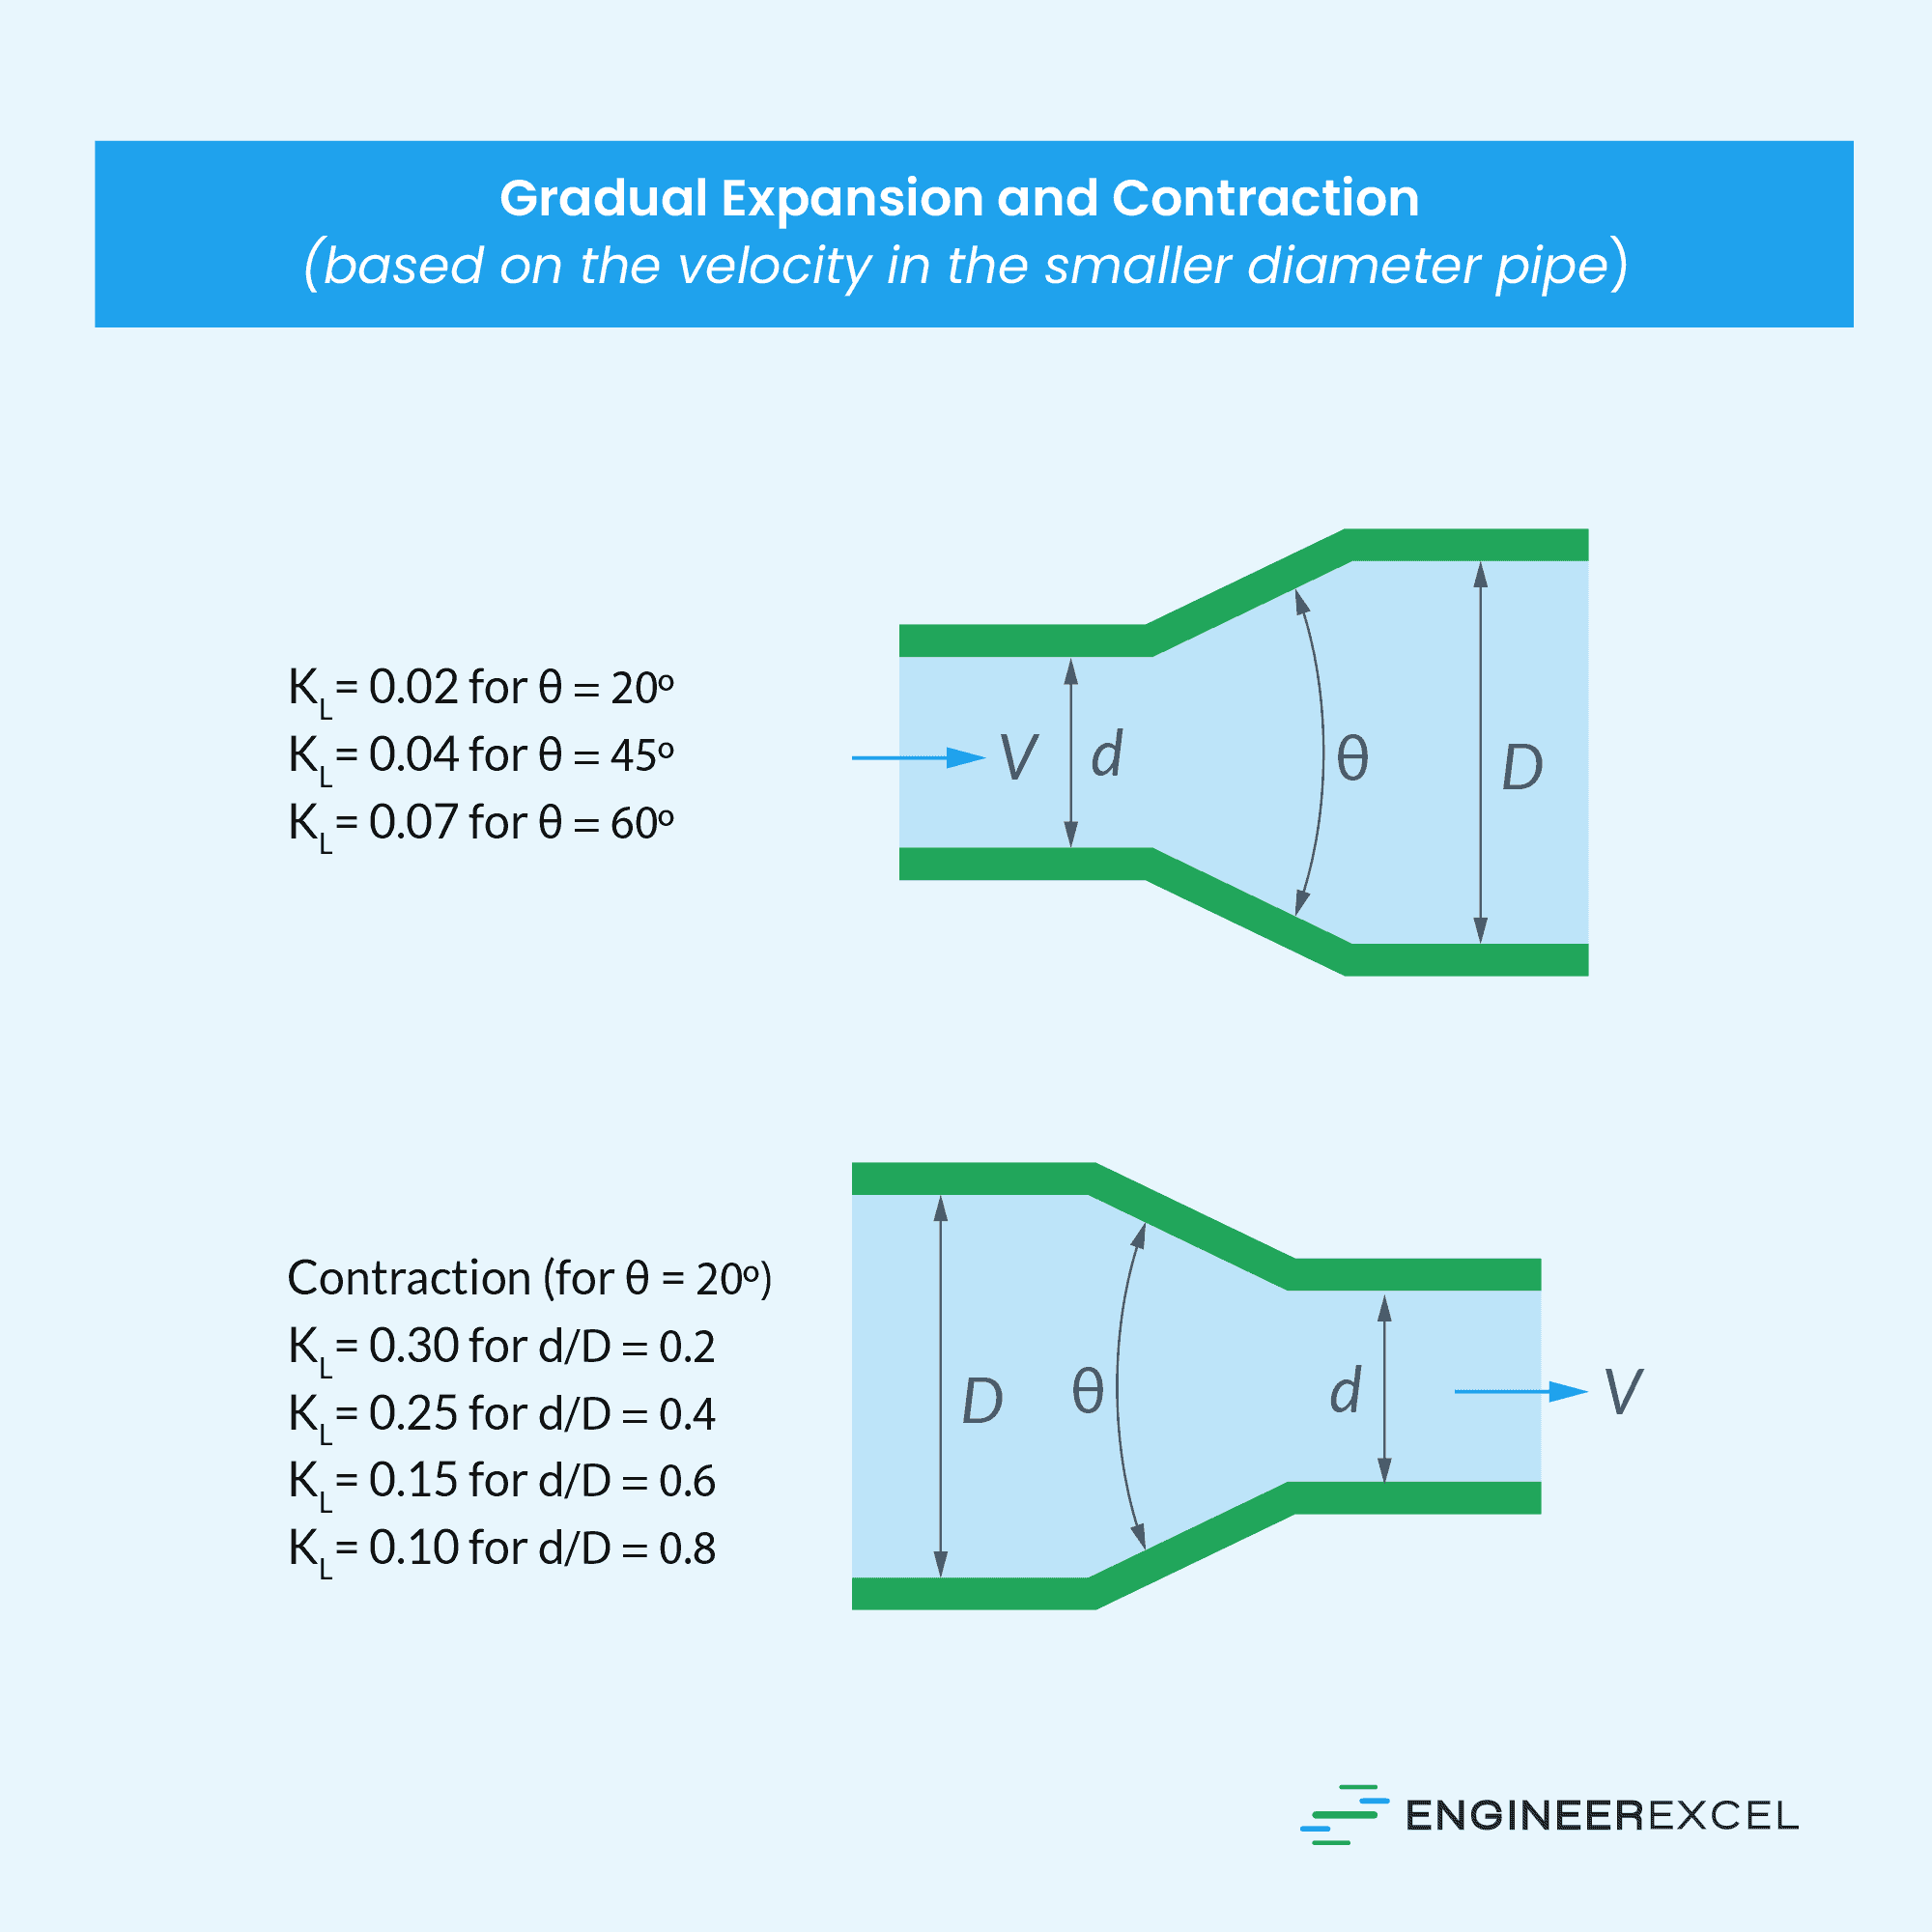 Loss Coefficient for Sudden and Gradual Expansions and Contractions